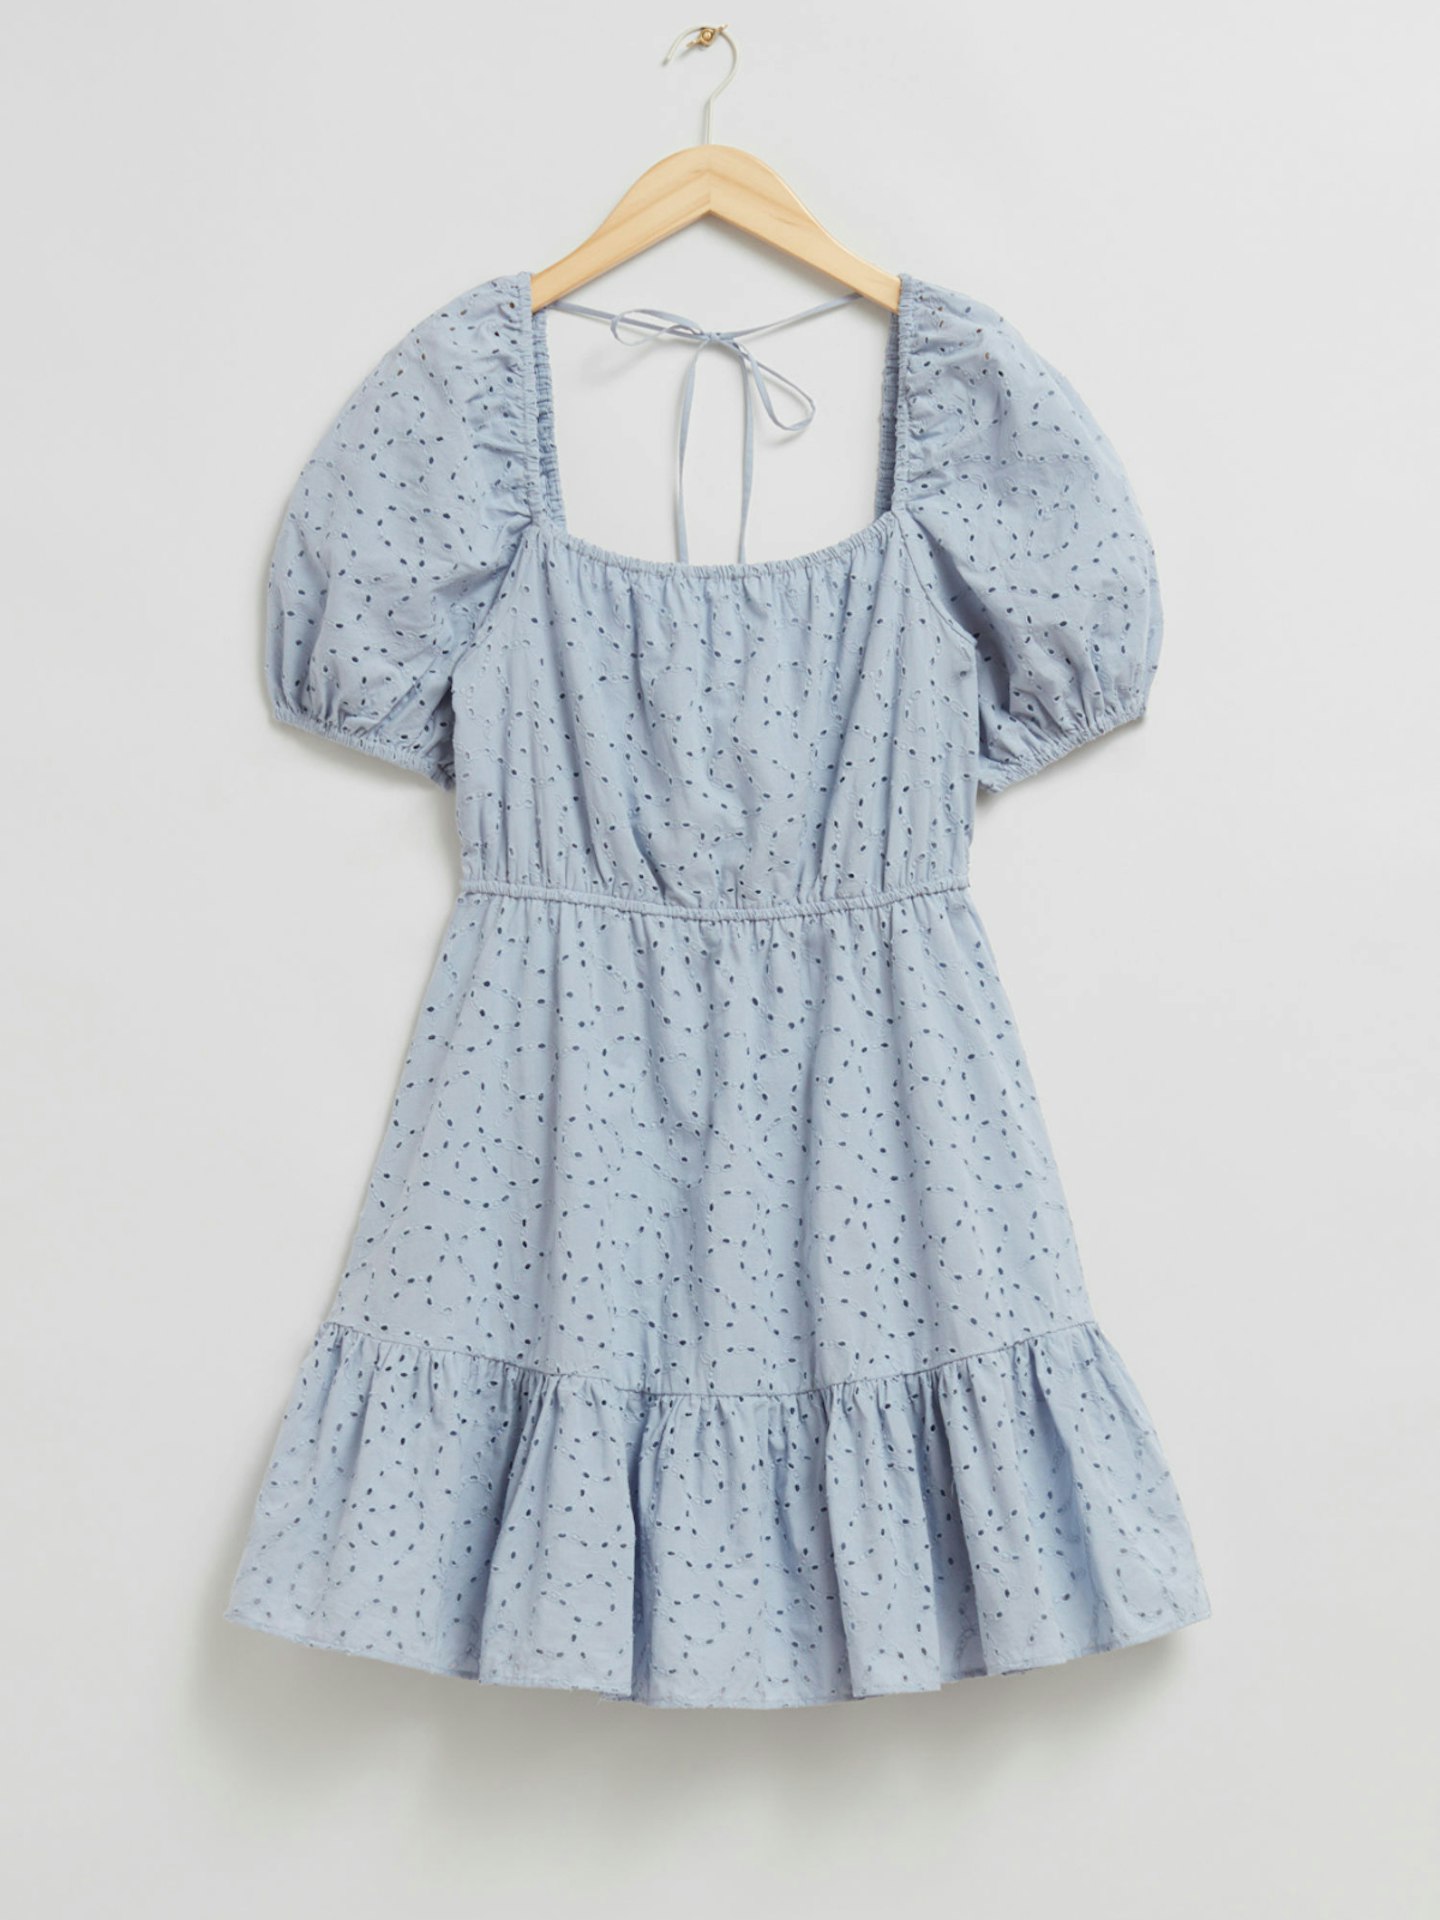 & Other Stories, Broderie Anglaise Mini Dress